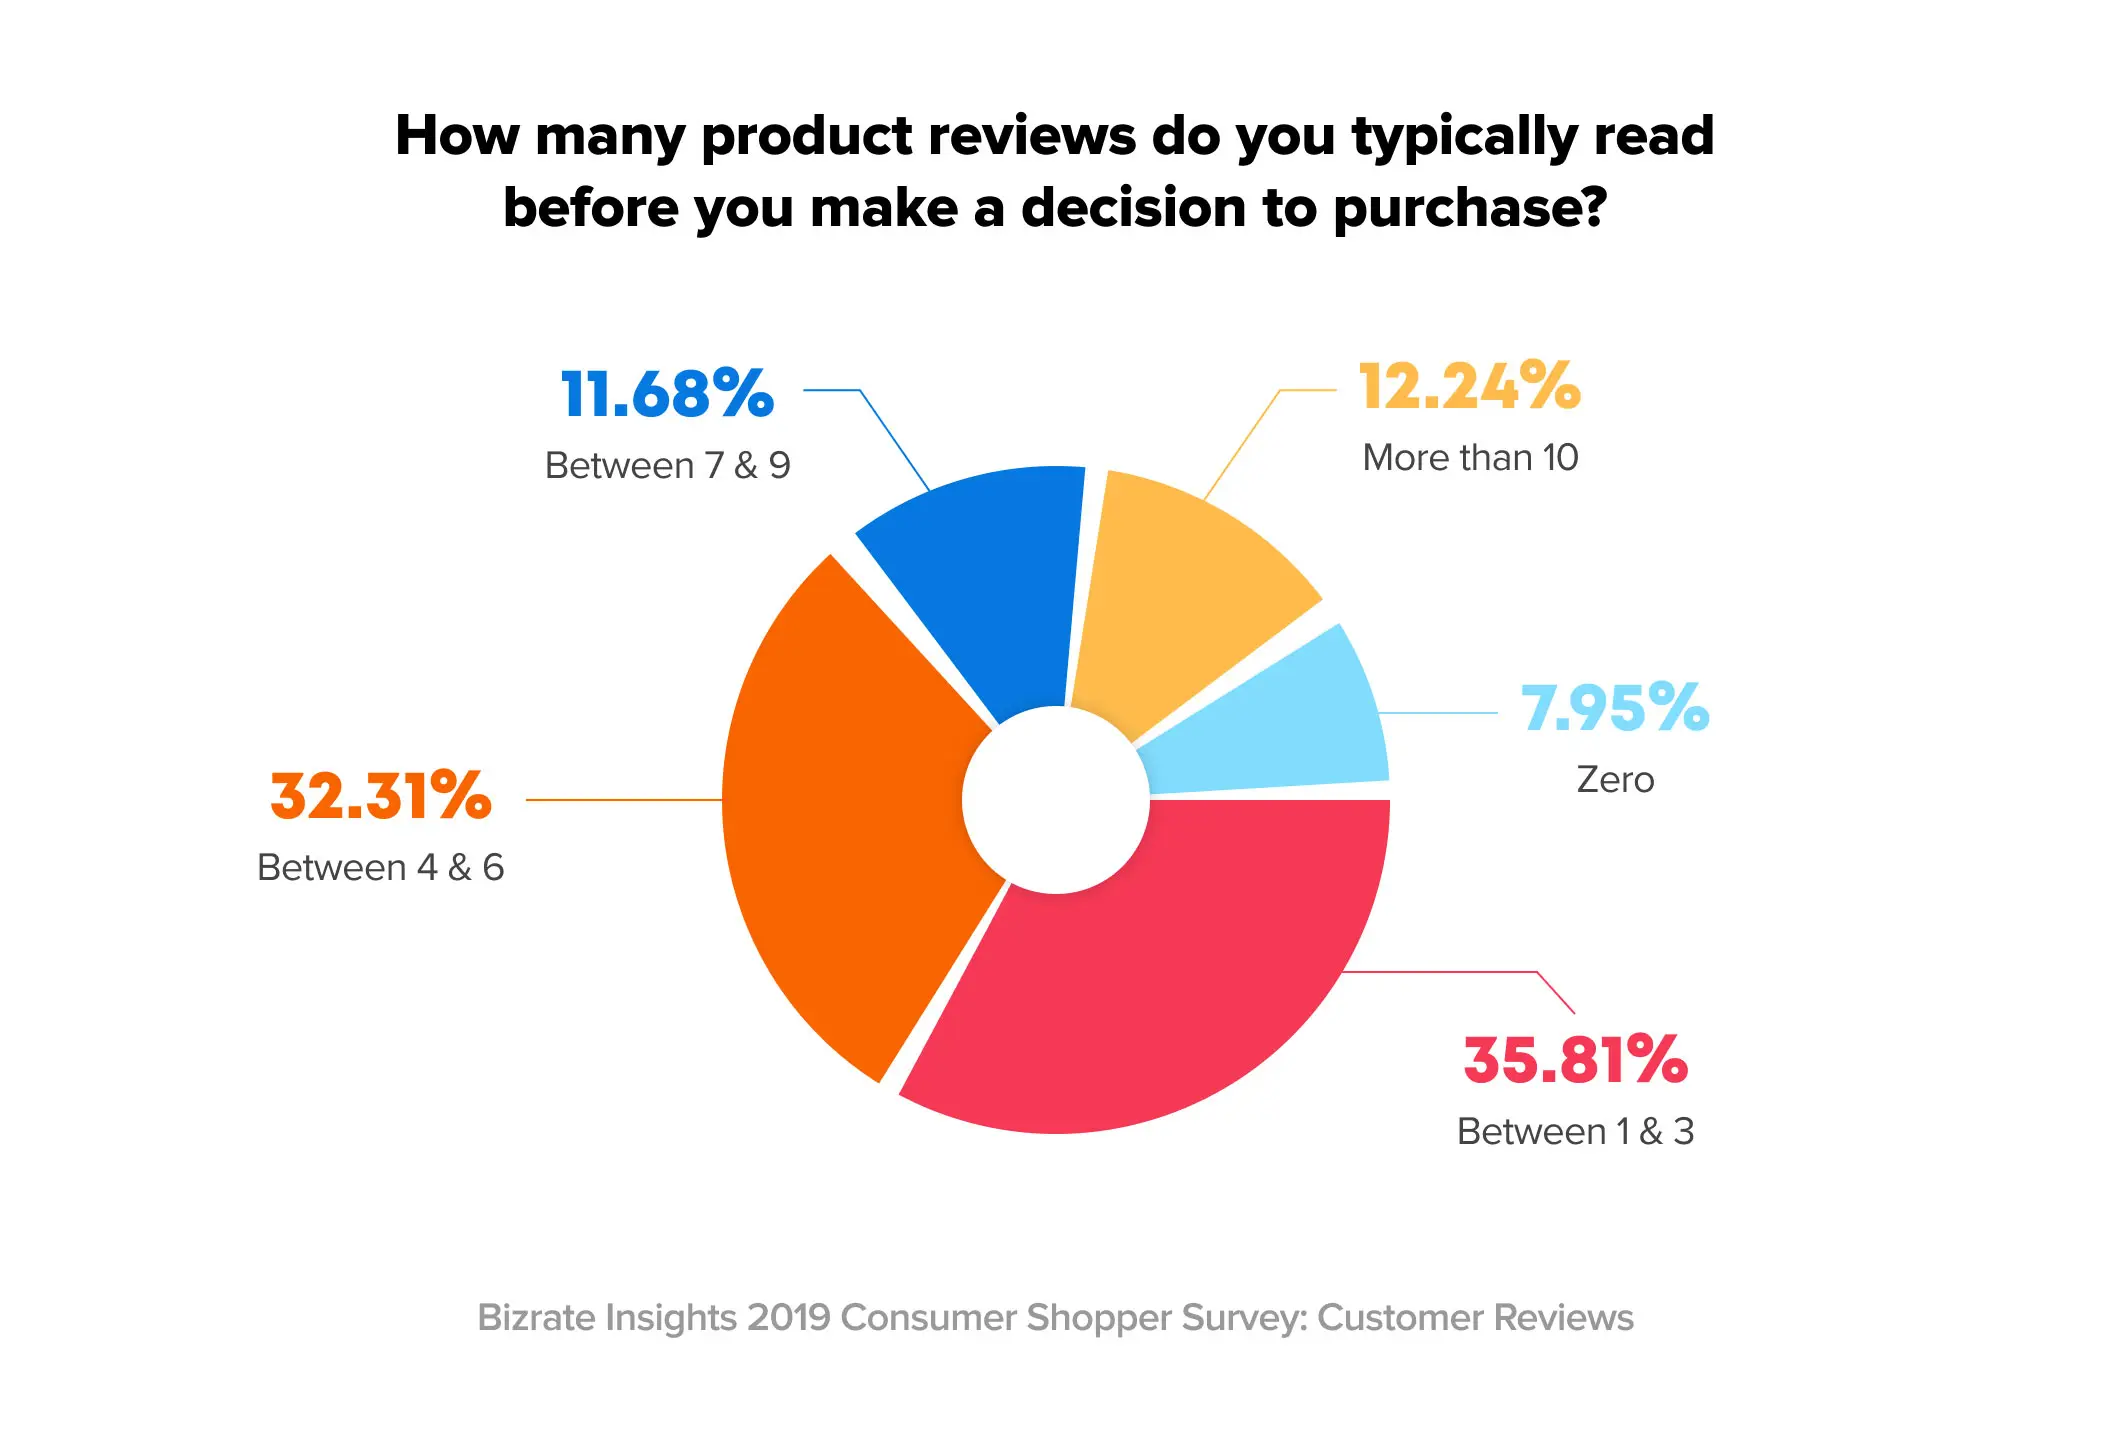 How many people read product reviews before making a purchase online